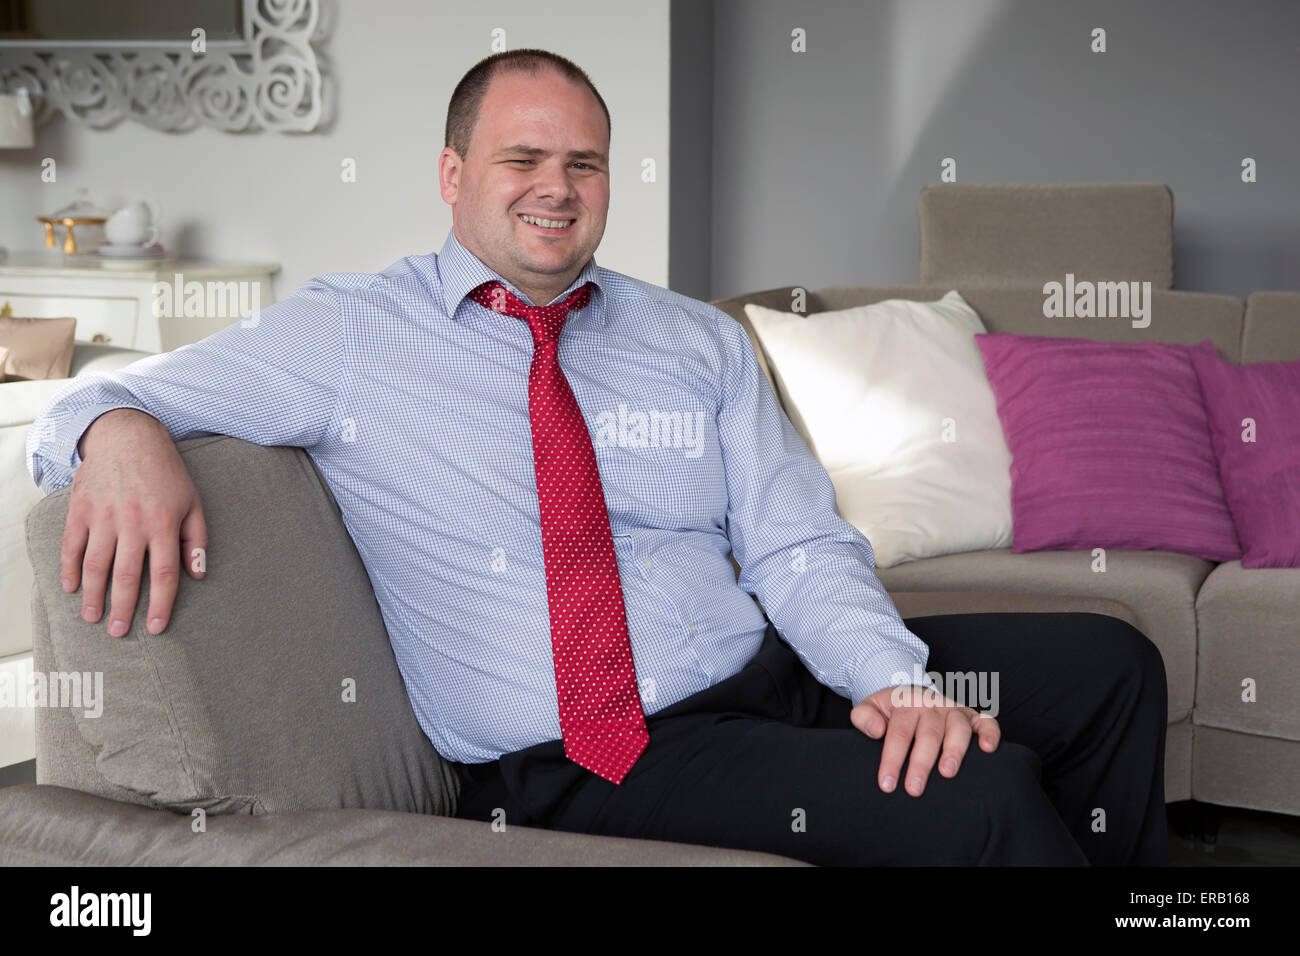 man in shirt and tie sits on couch and smiles Stock Photo